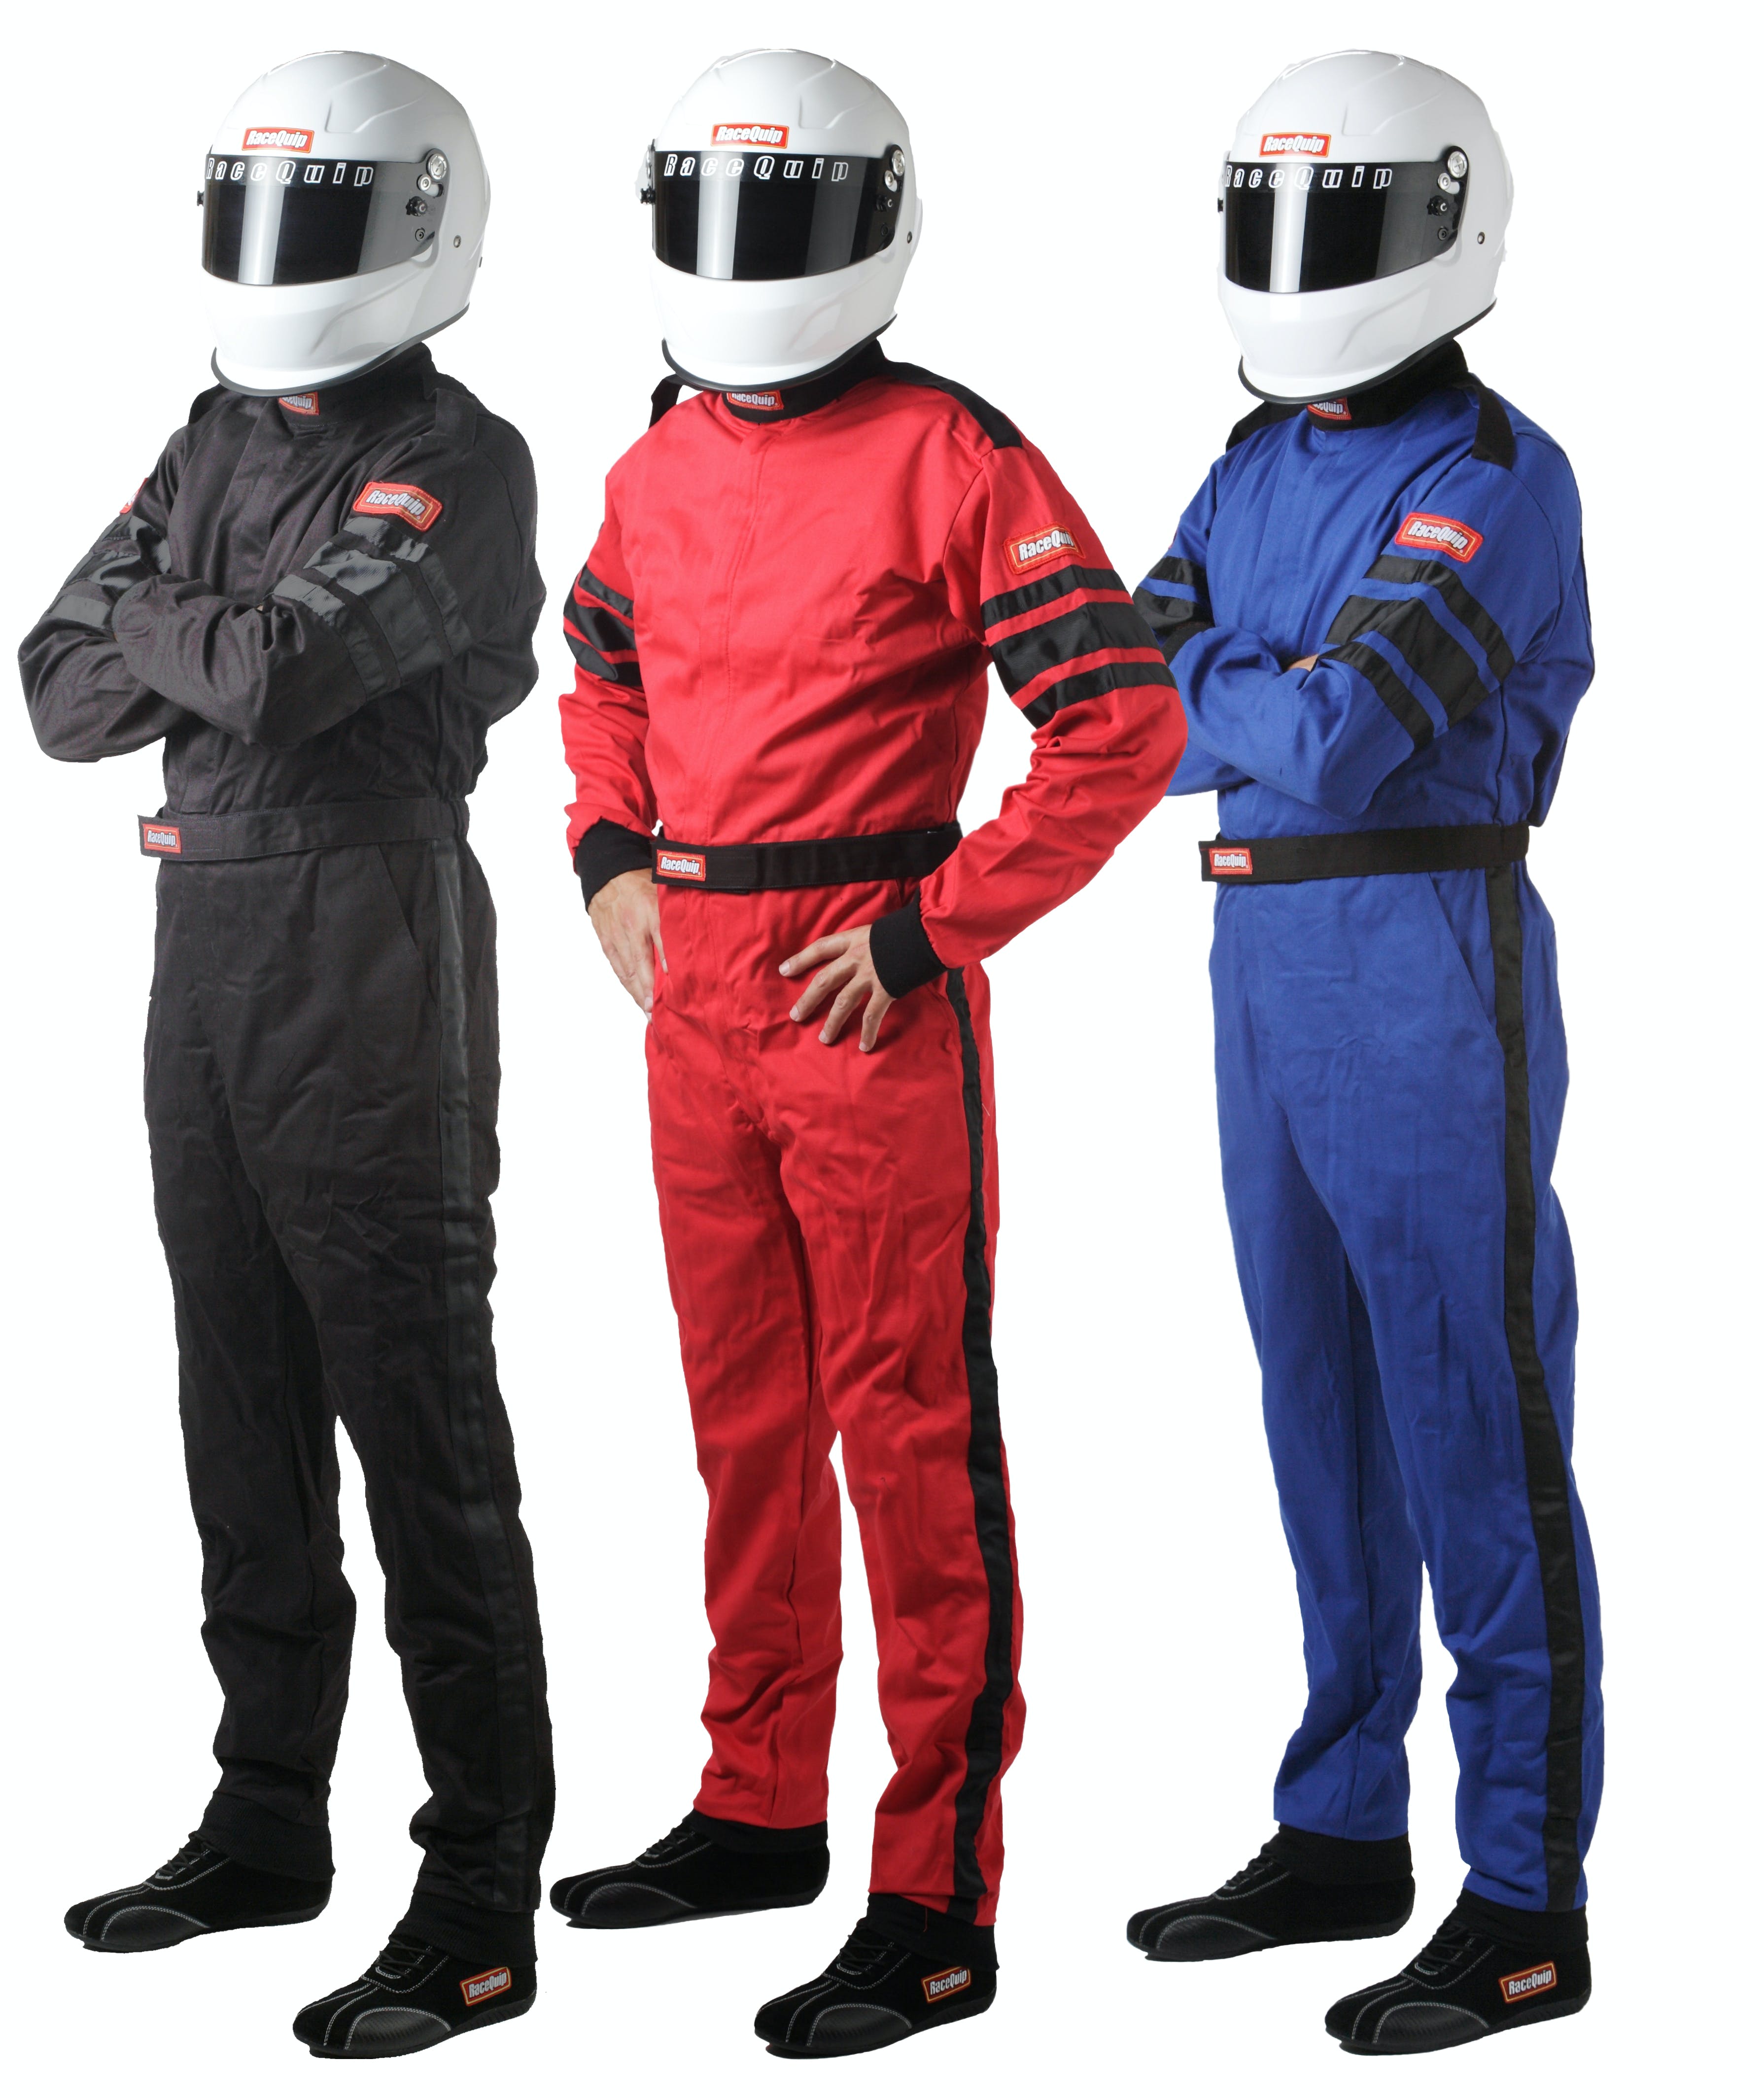 RaceQuip 110027 SFI-1 Pyrovatex One-Piece Single-Layer Racing Fire Suit (Blue, XX-Large)